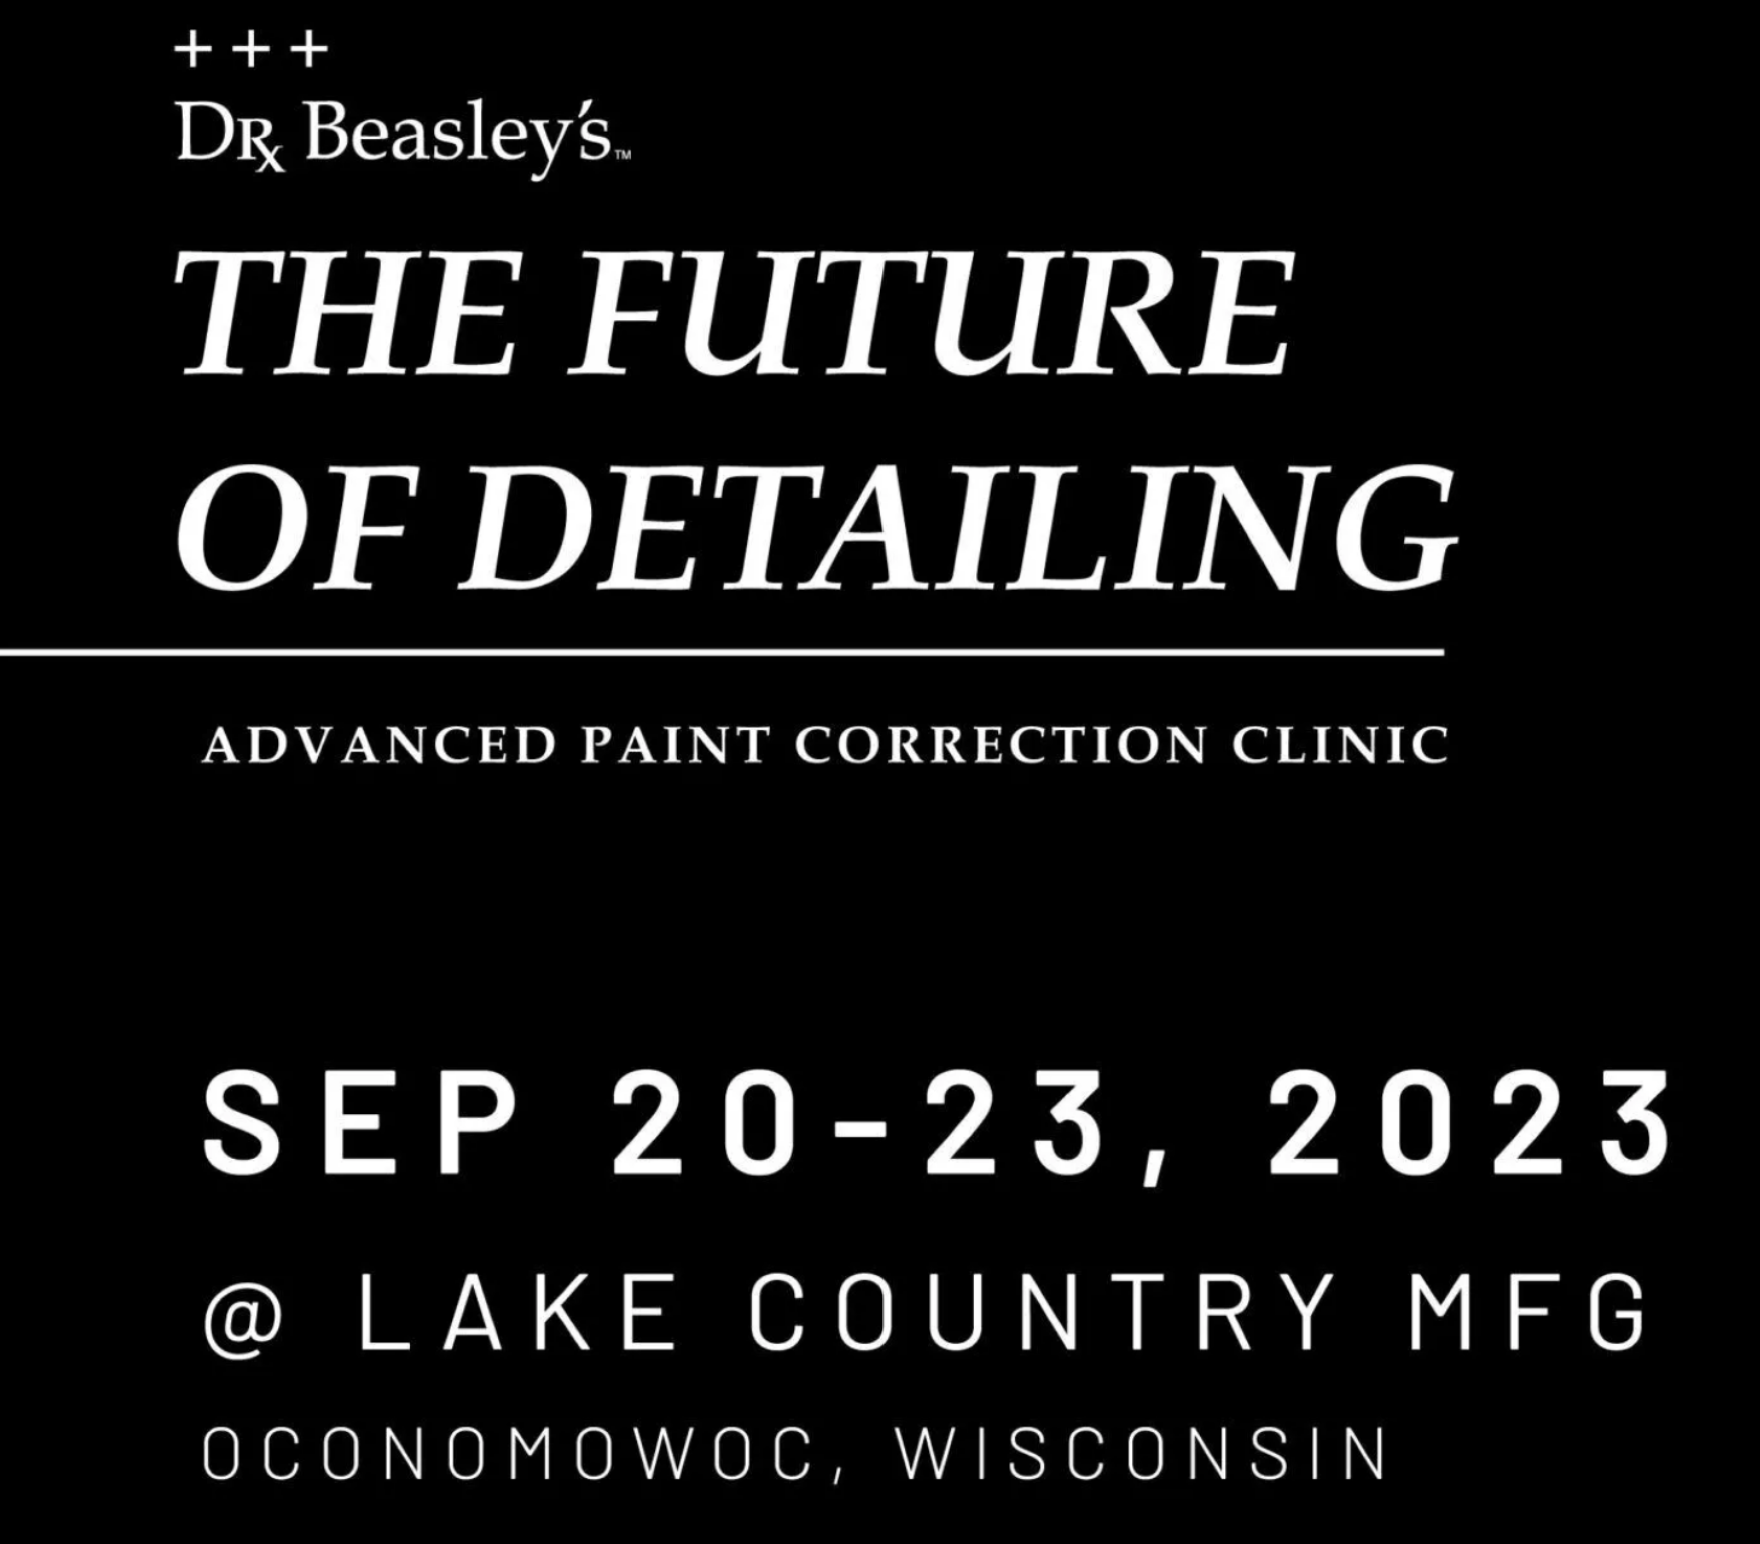 Dr. Beasley’s Future of Detailing Advanced Paint Correction Clinic